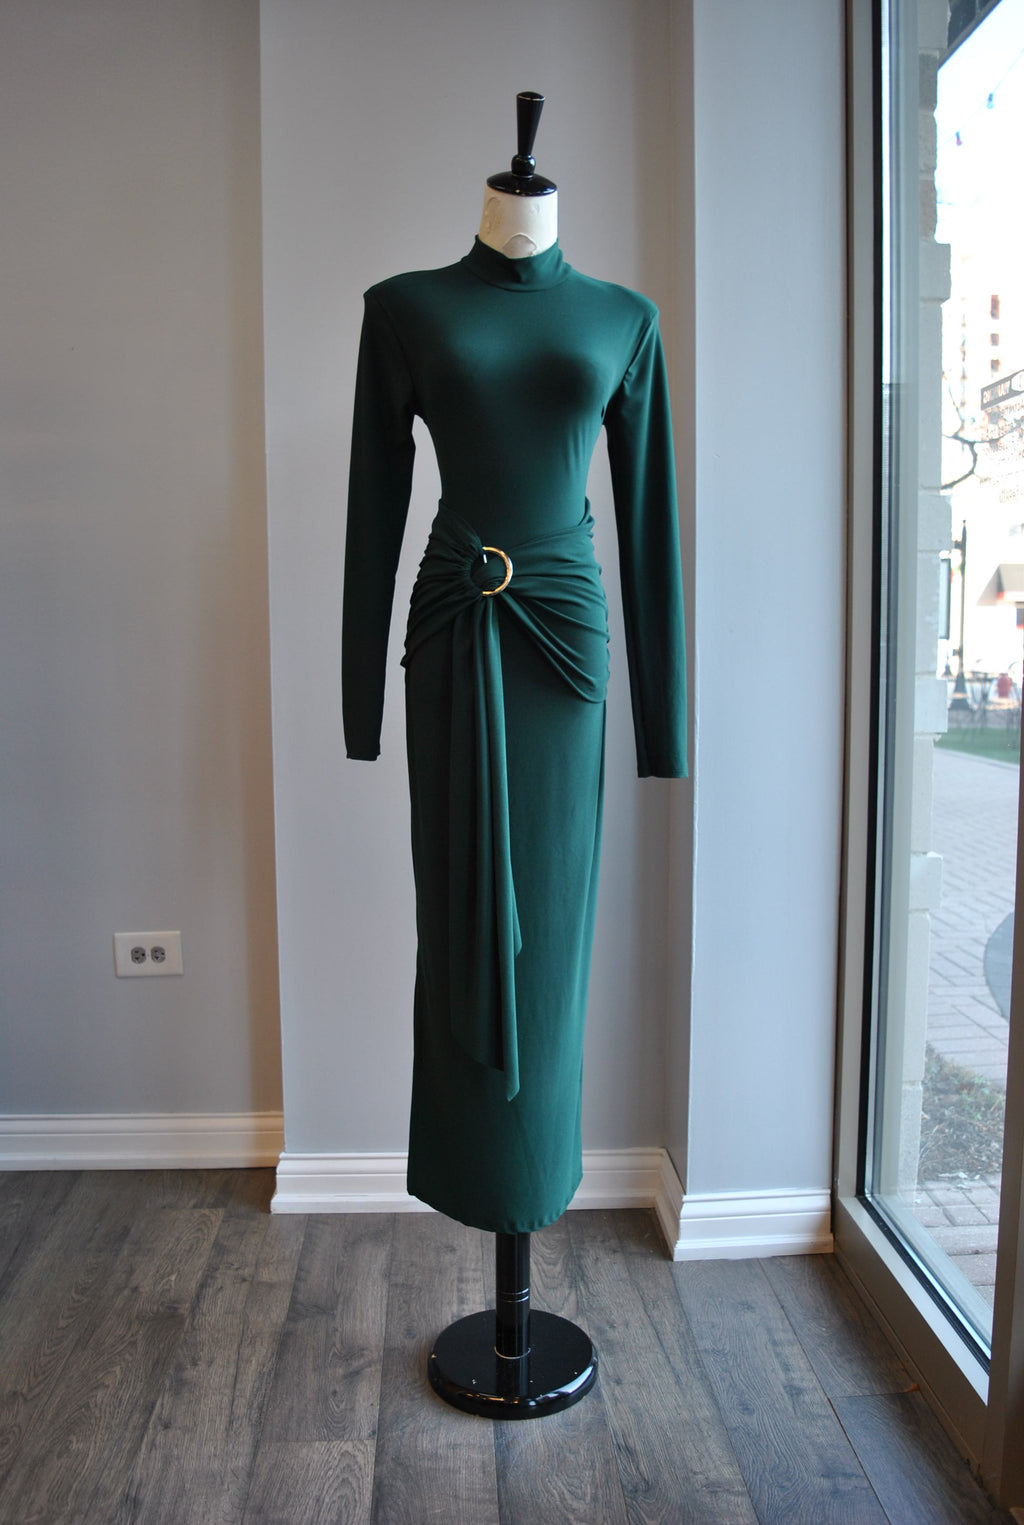 FOREST GREEN SIMPLE MIDI DRESS WITH TIE IN A FRONT